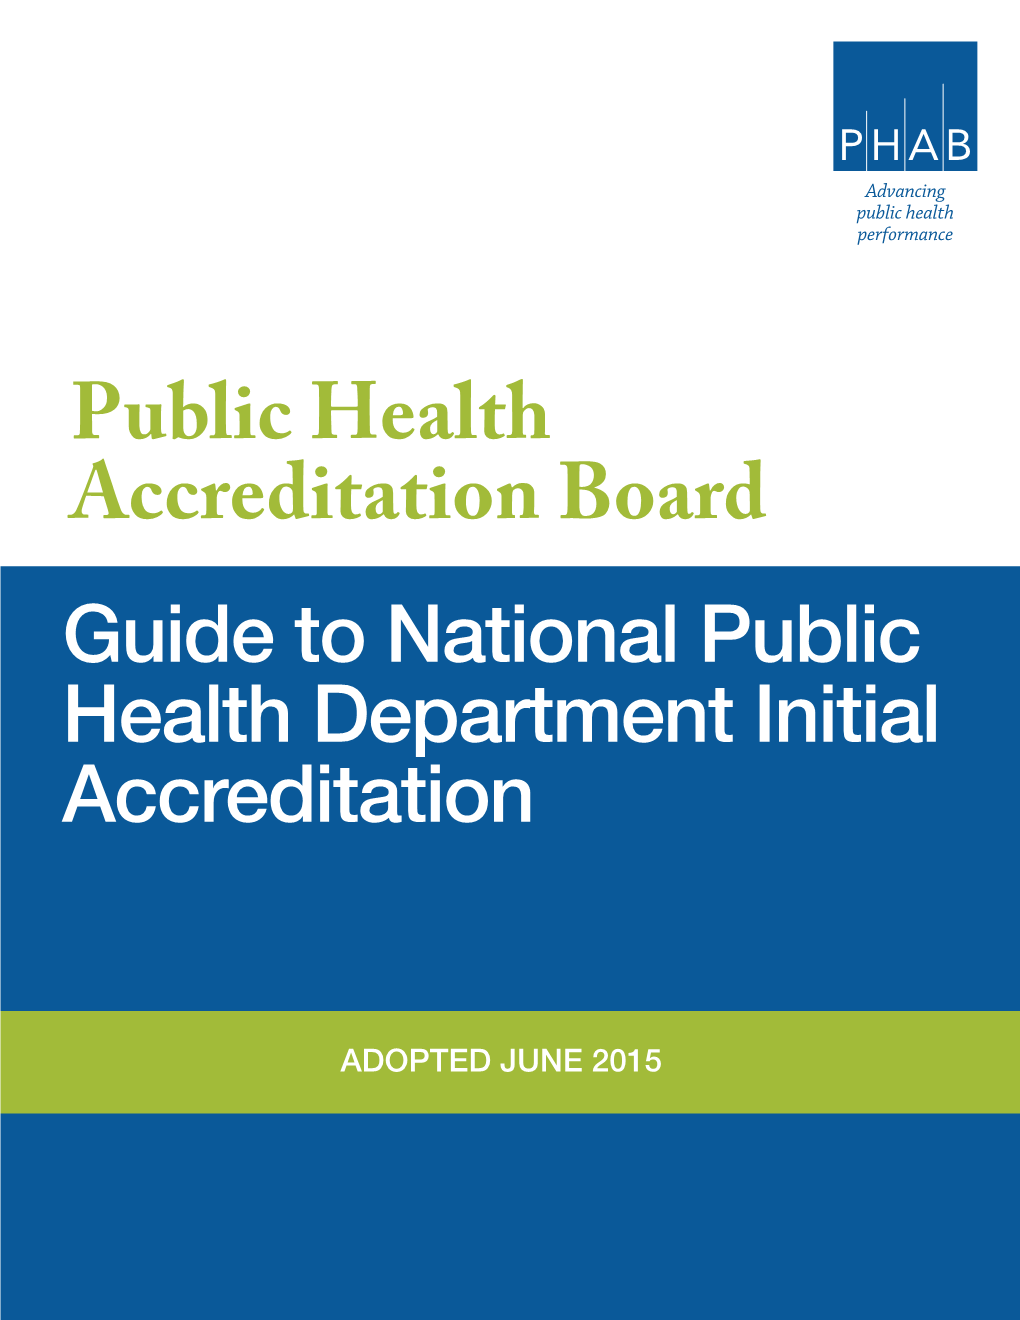 Guide to National Public Health Department Initial Accreditation